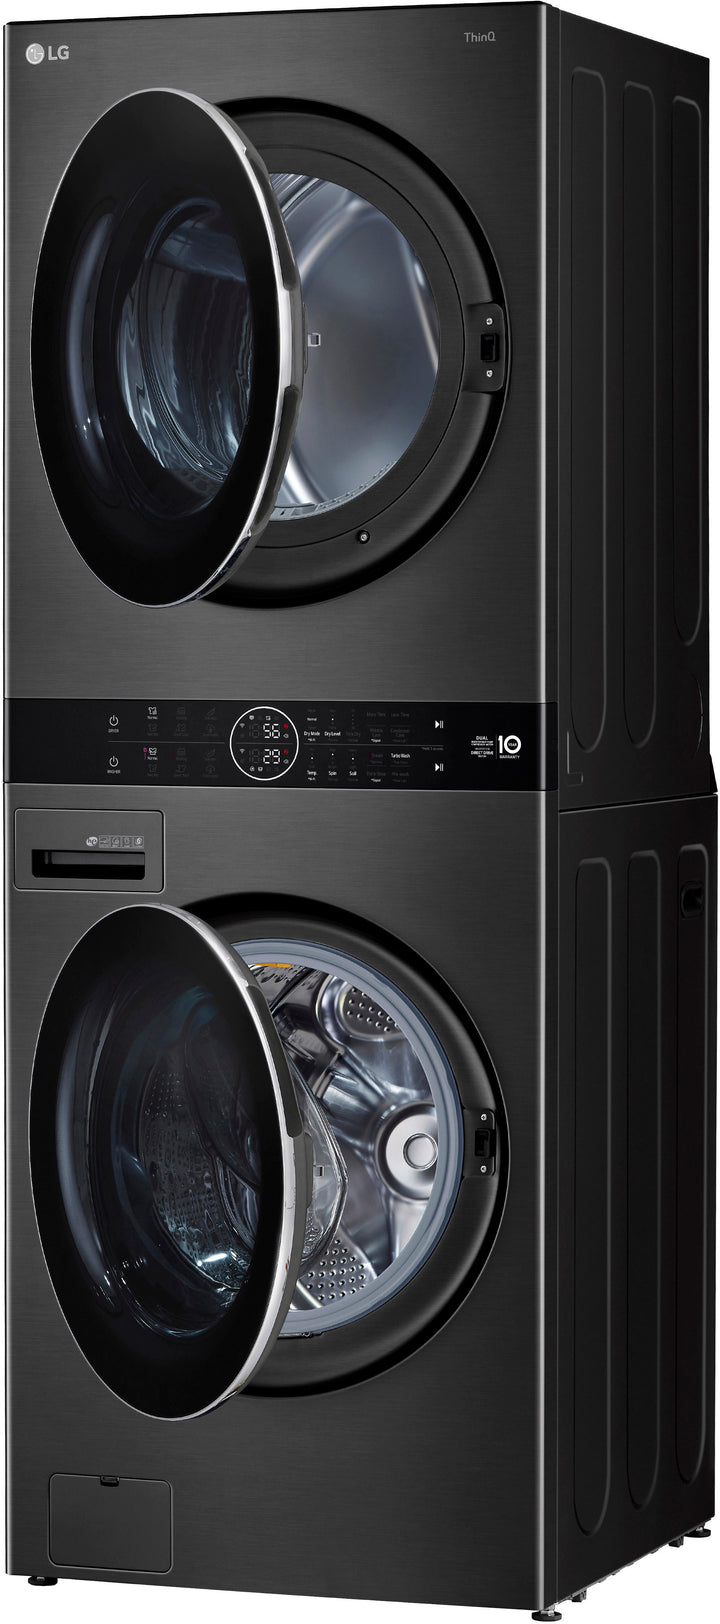 LG - 4.5 Cu. Ft. HE Smart Front Load Washer and 7.4 Cu. Ft. Electric Dryer WashTower with Steam and Ventless Dryer - Black Steel_3